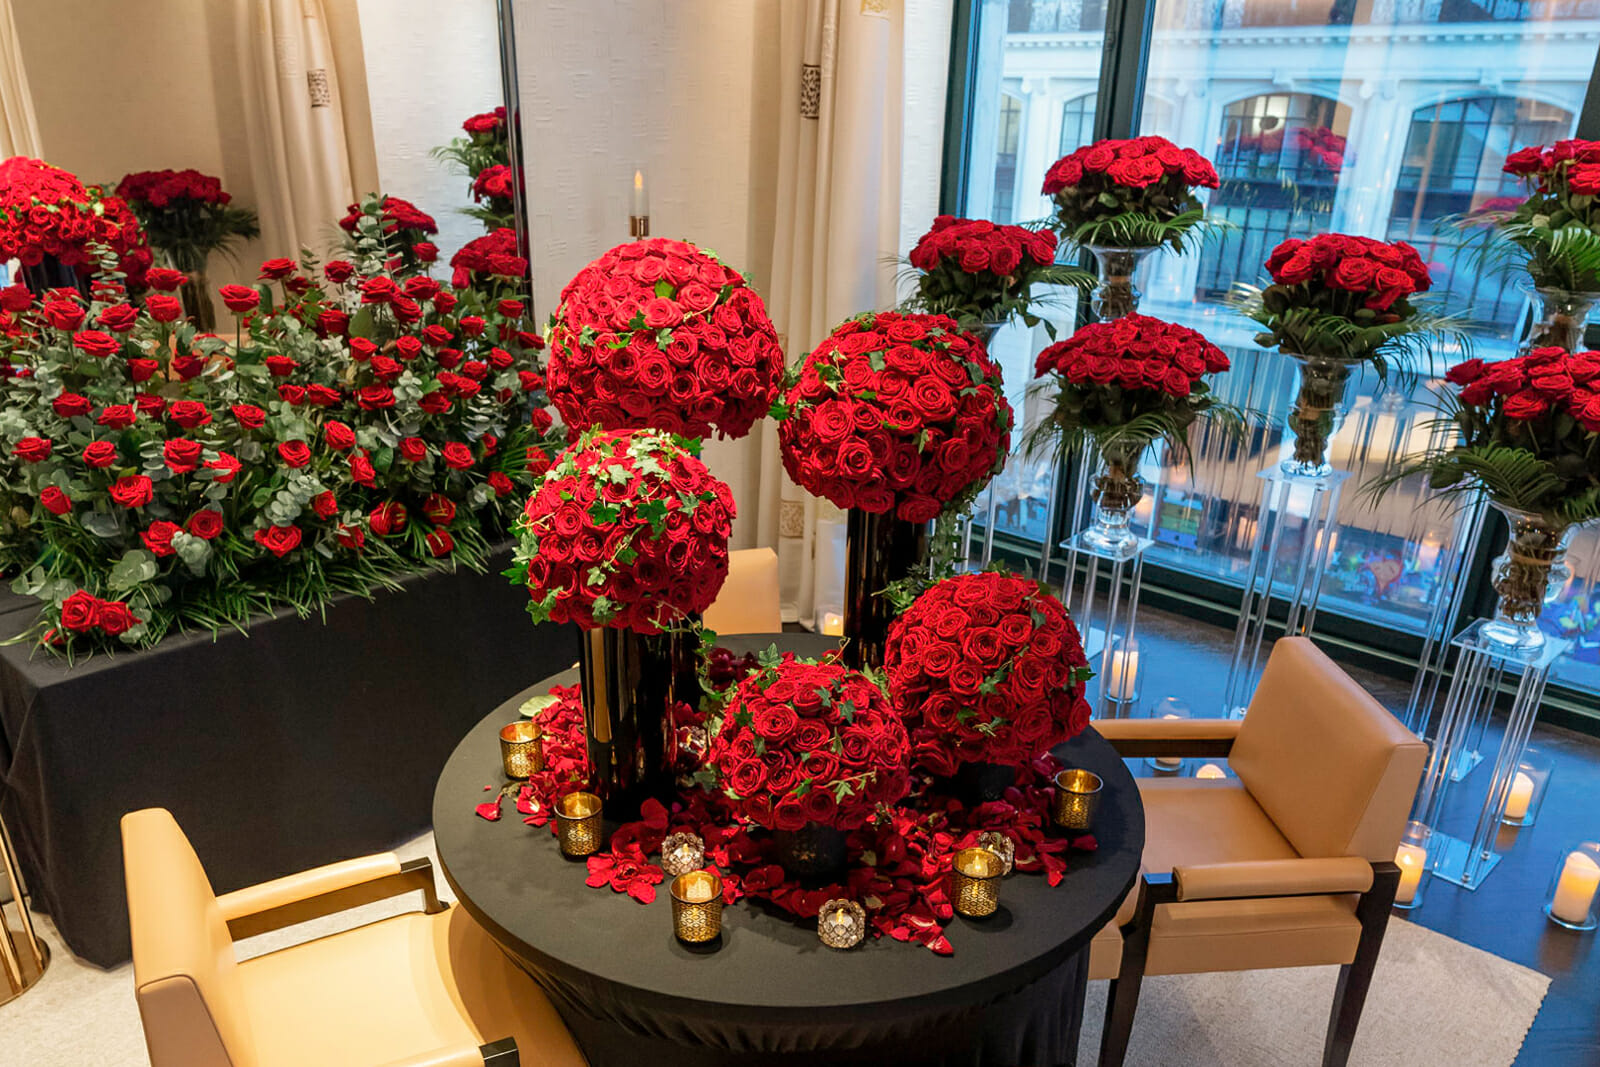 Surprise your partner with a sea of red roses in your hotel suite.